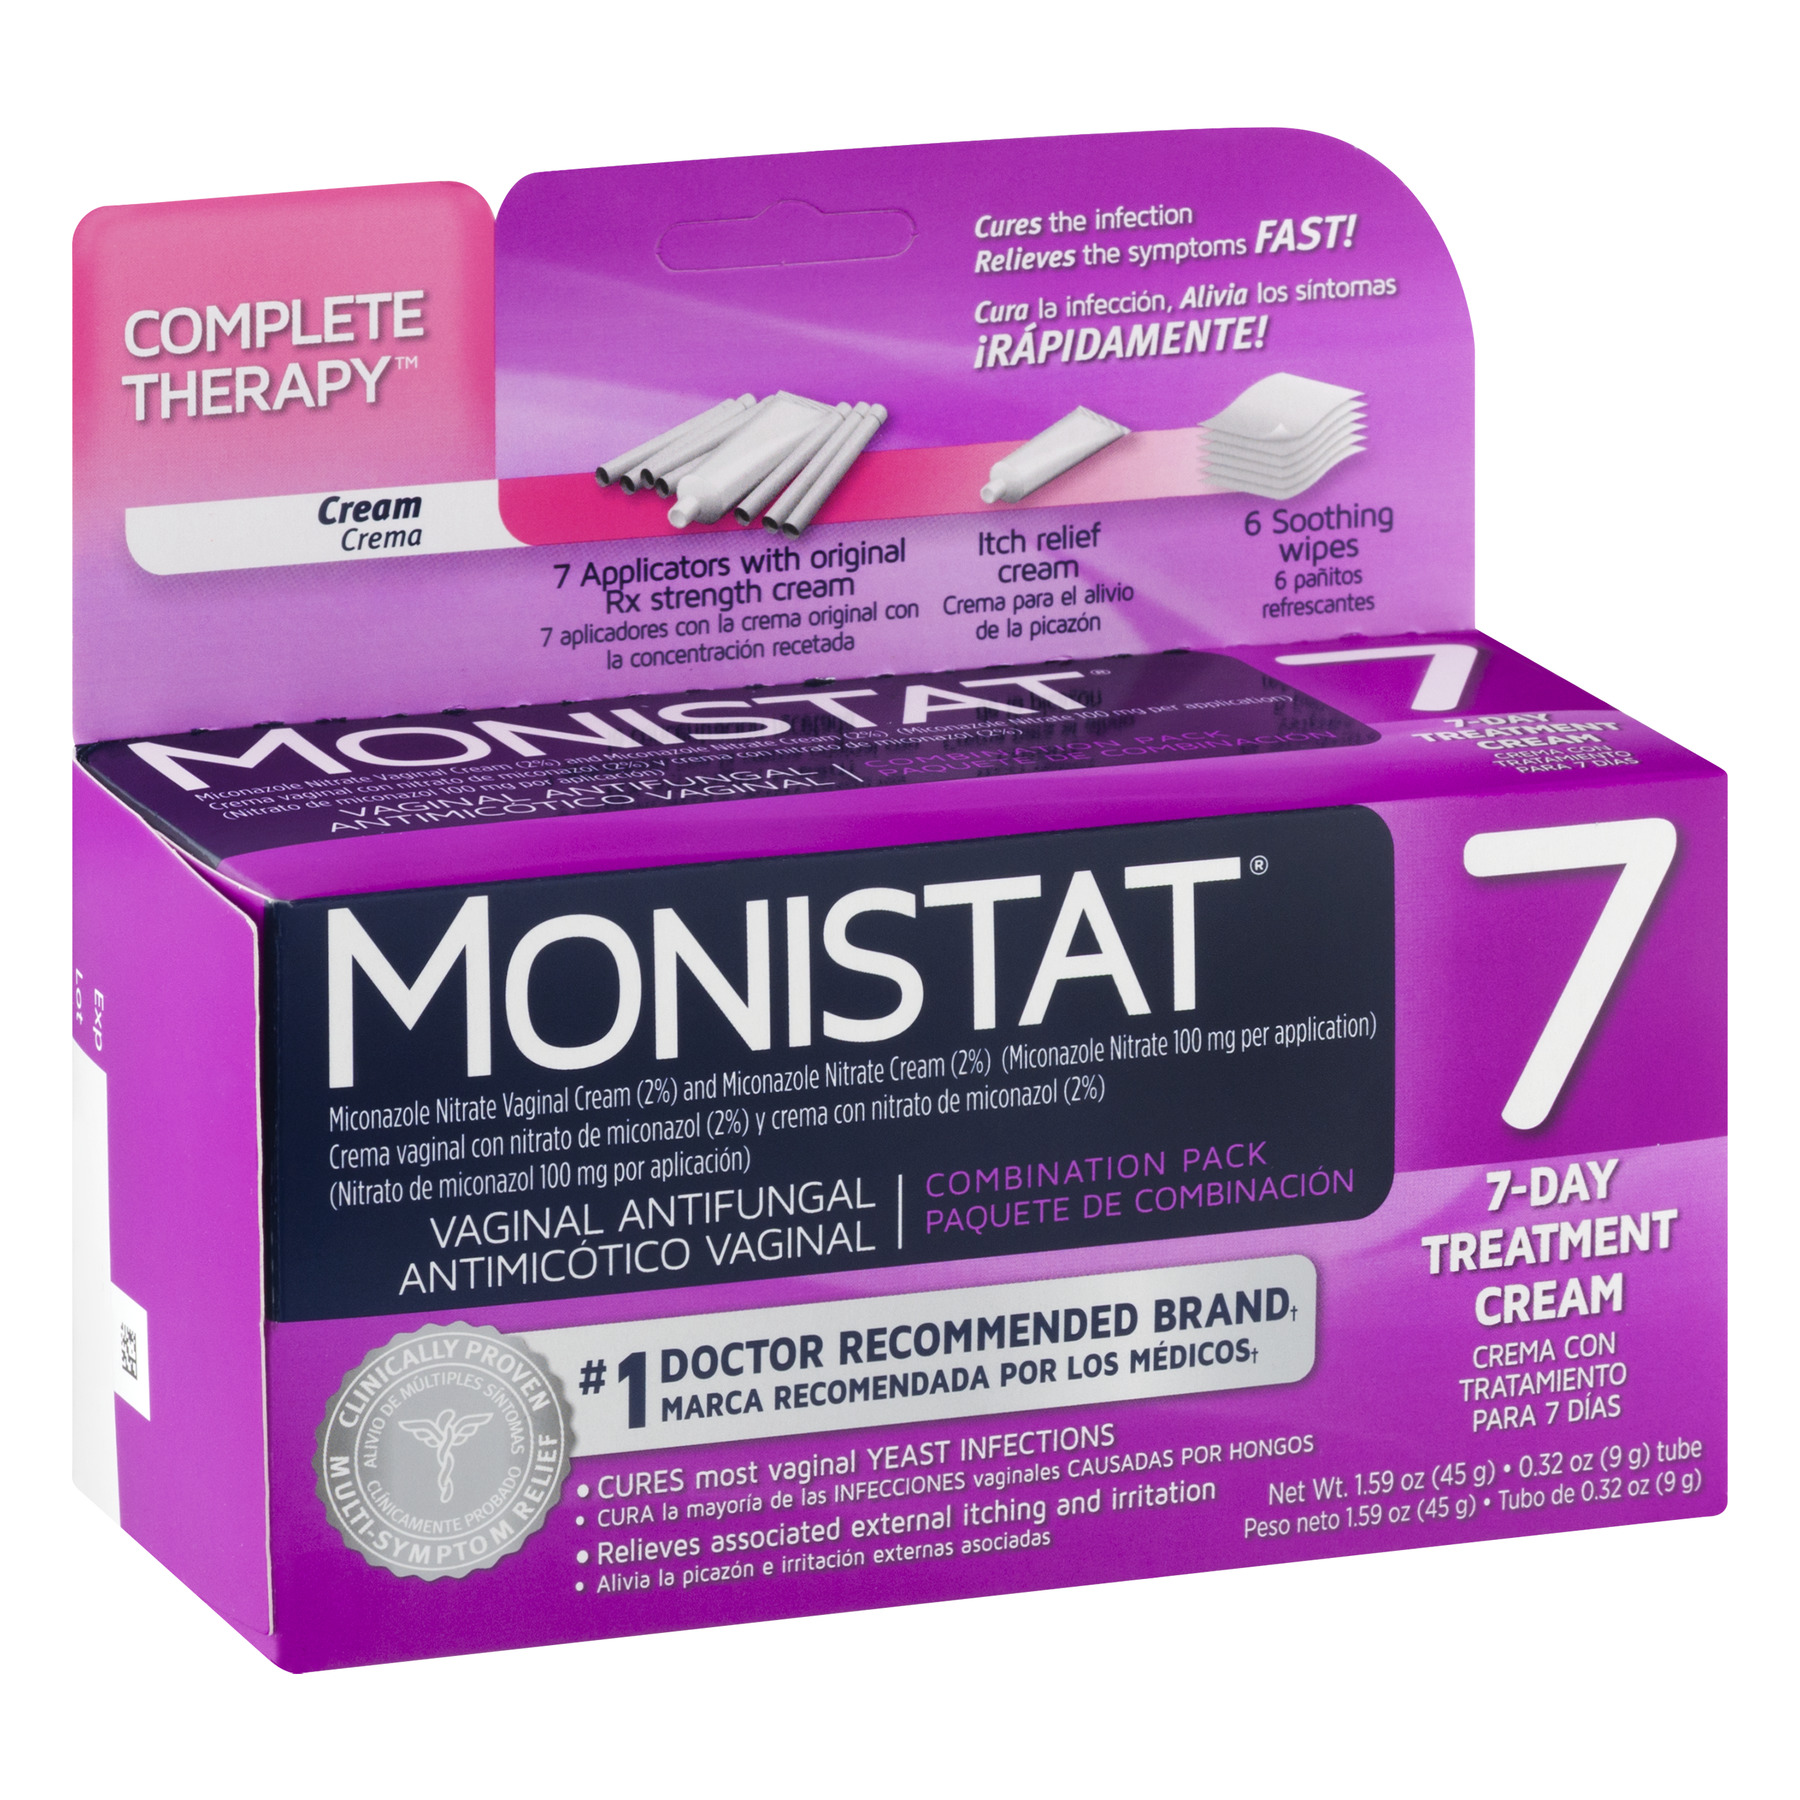 Monistat, Vaginal Antifungal 3-Day Treatment Ovules Complete Pack - image 2 of 8